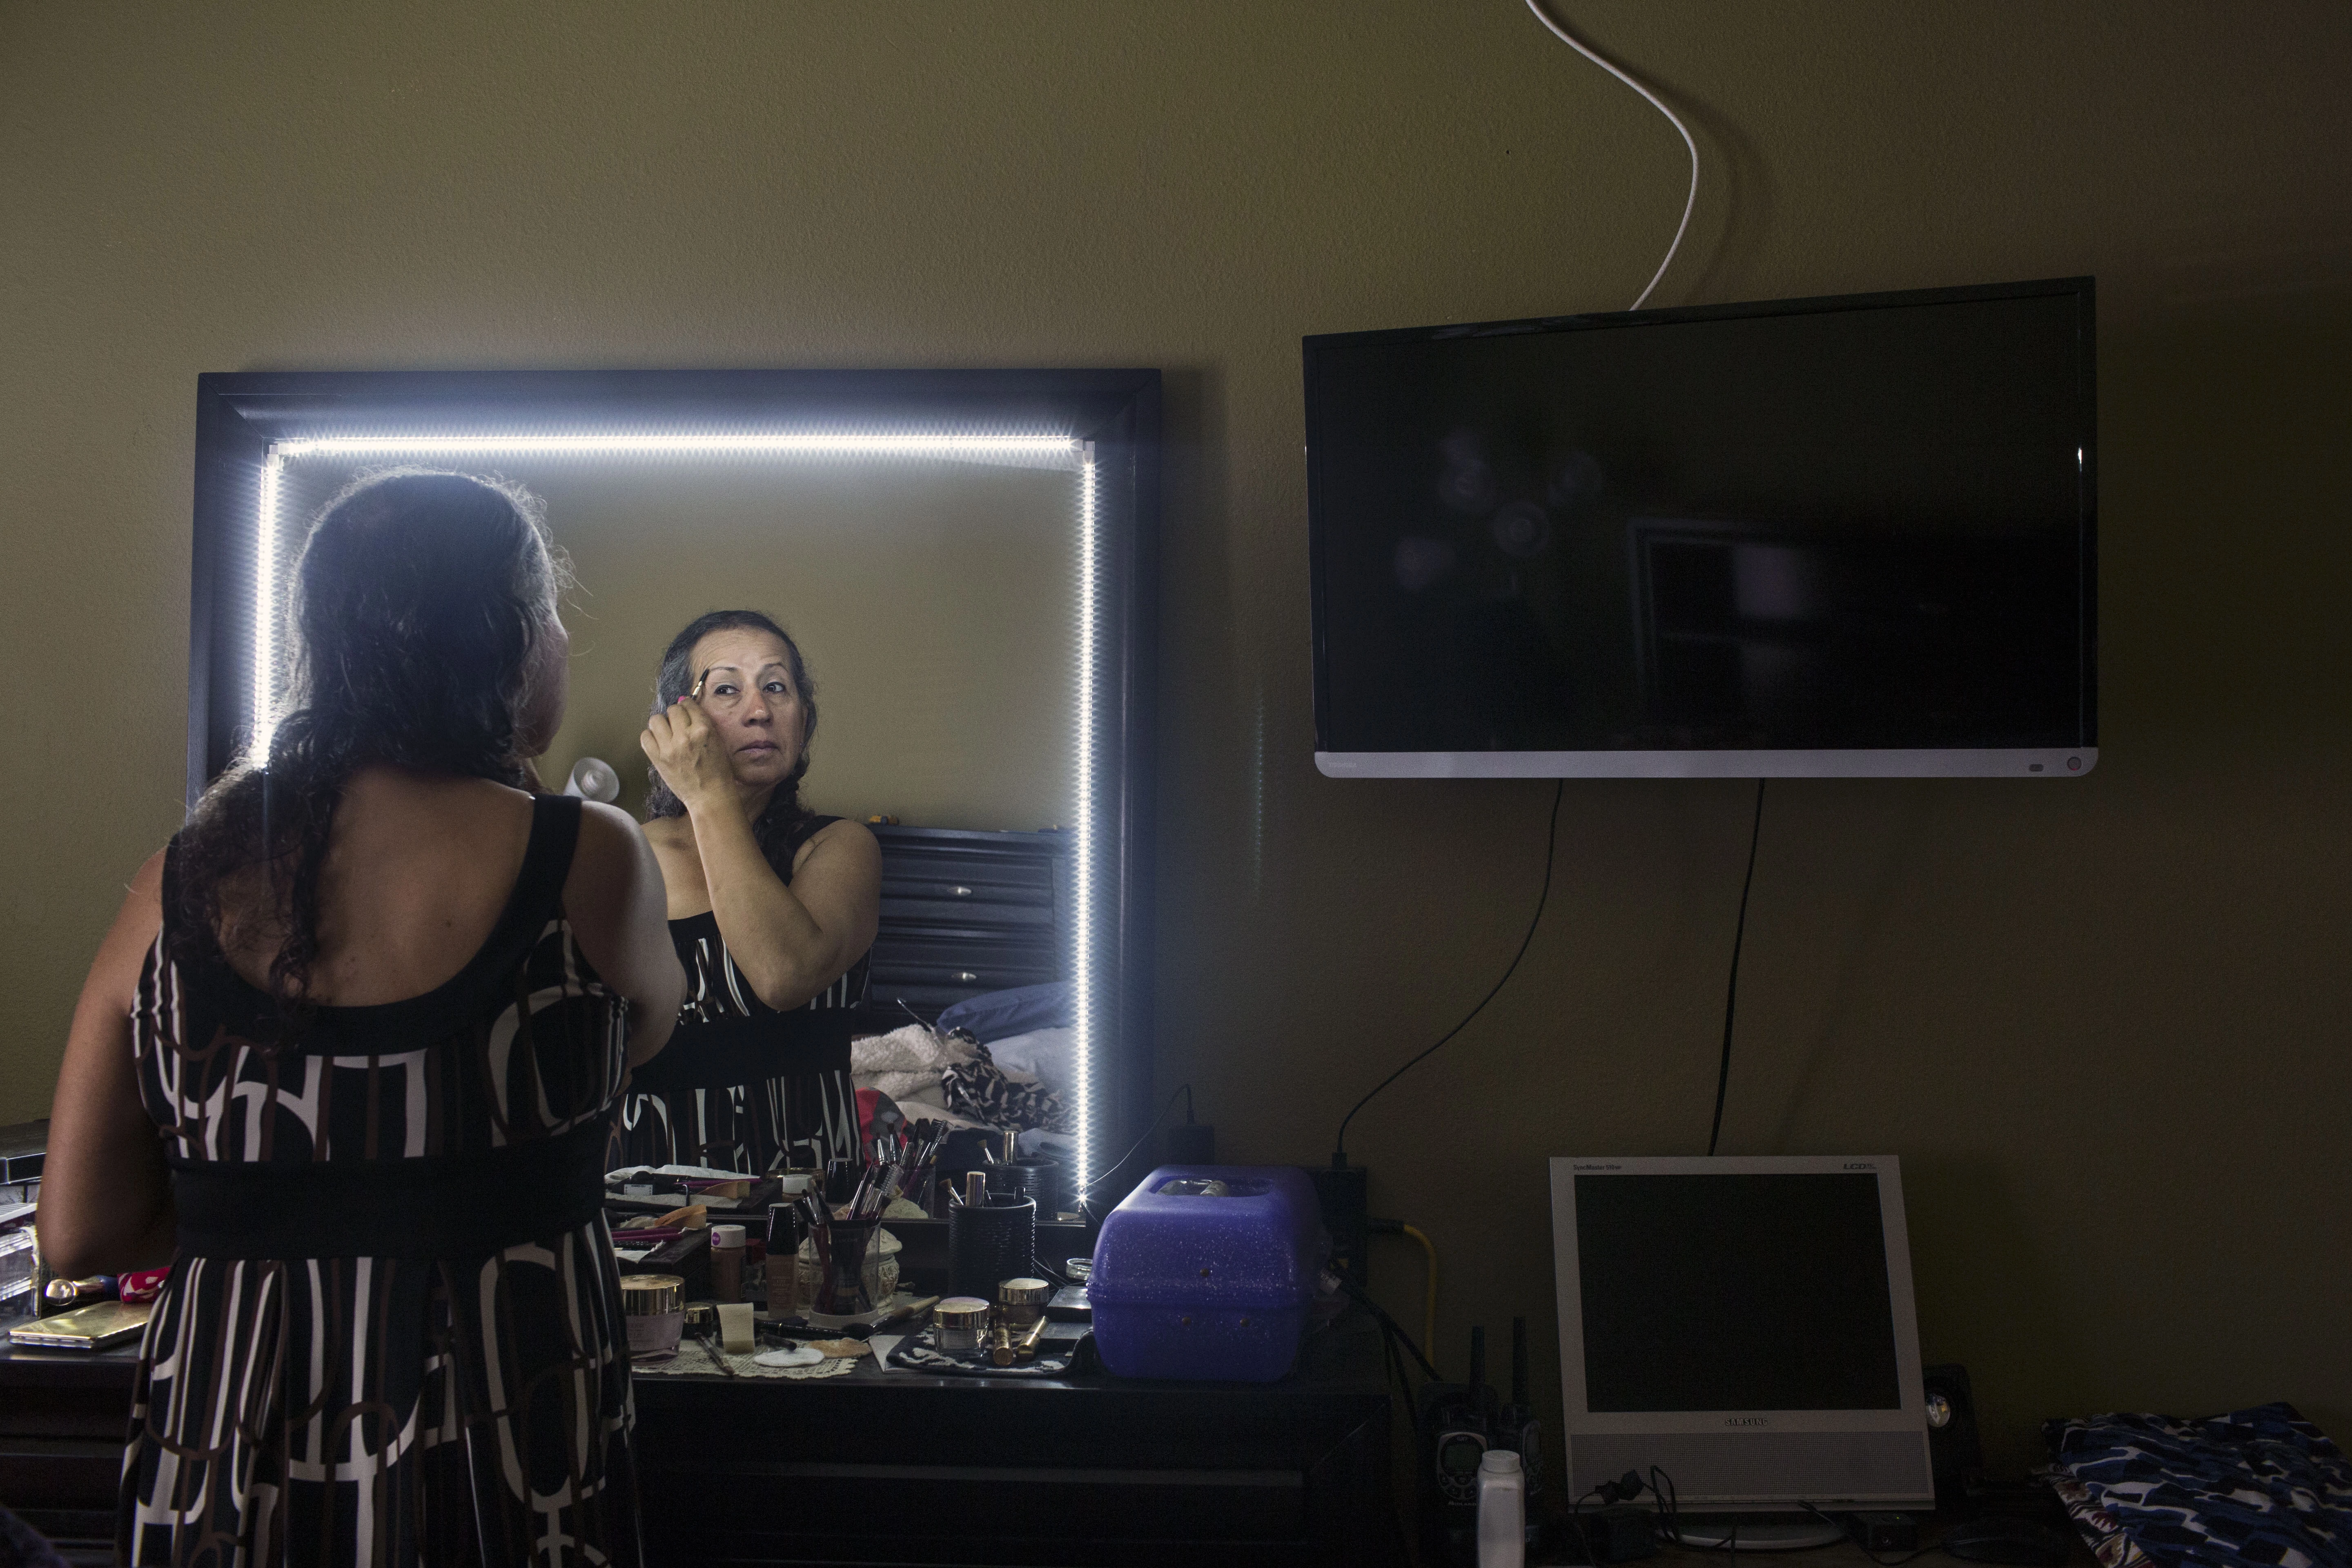 Former Uber driver, Rachel Galindo gets ready for the day in her home on April 30, 2017, in Los Angeles, California. As a transgender person, Galindo says she faced a lot of discrimination while driving for the company.